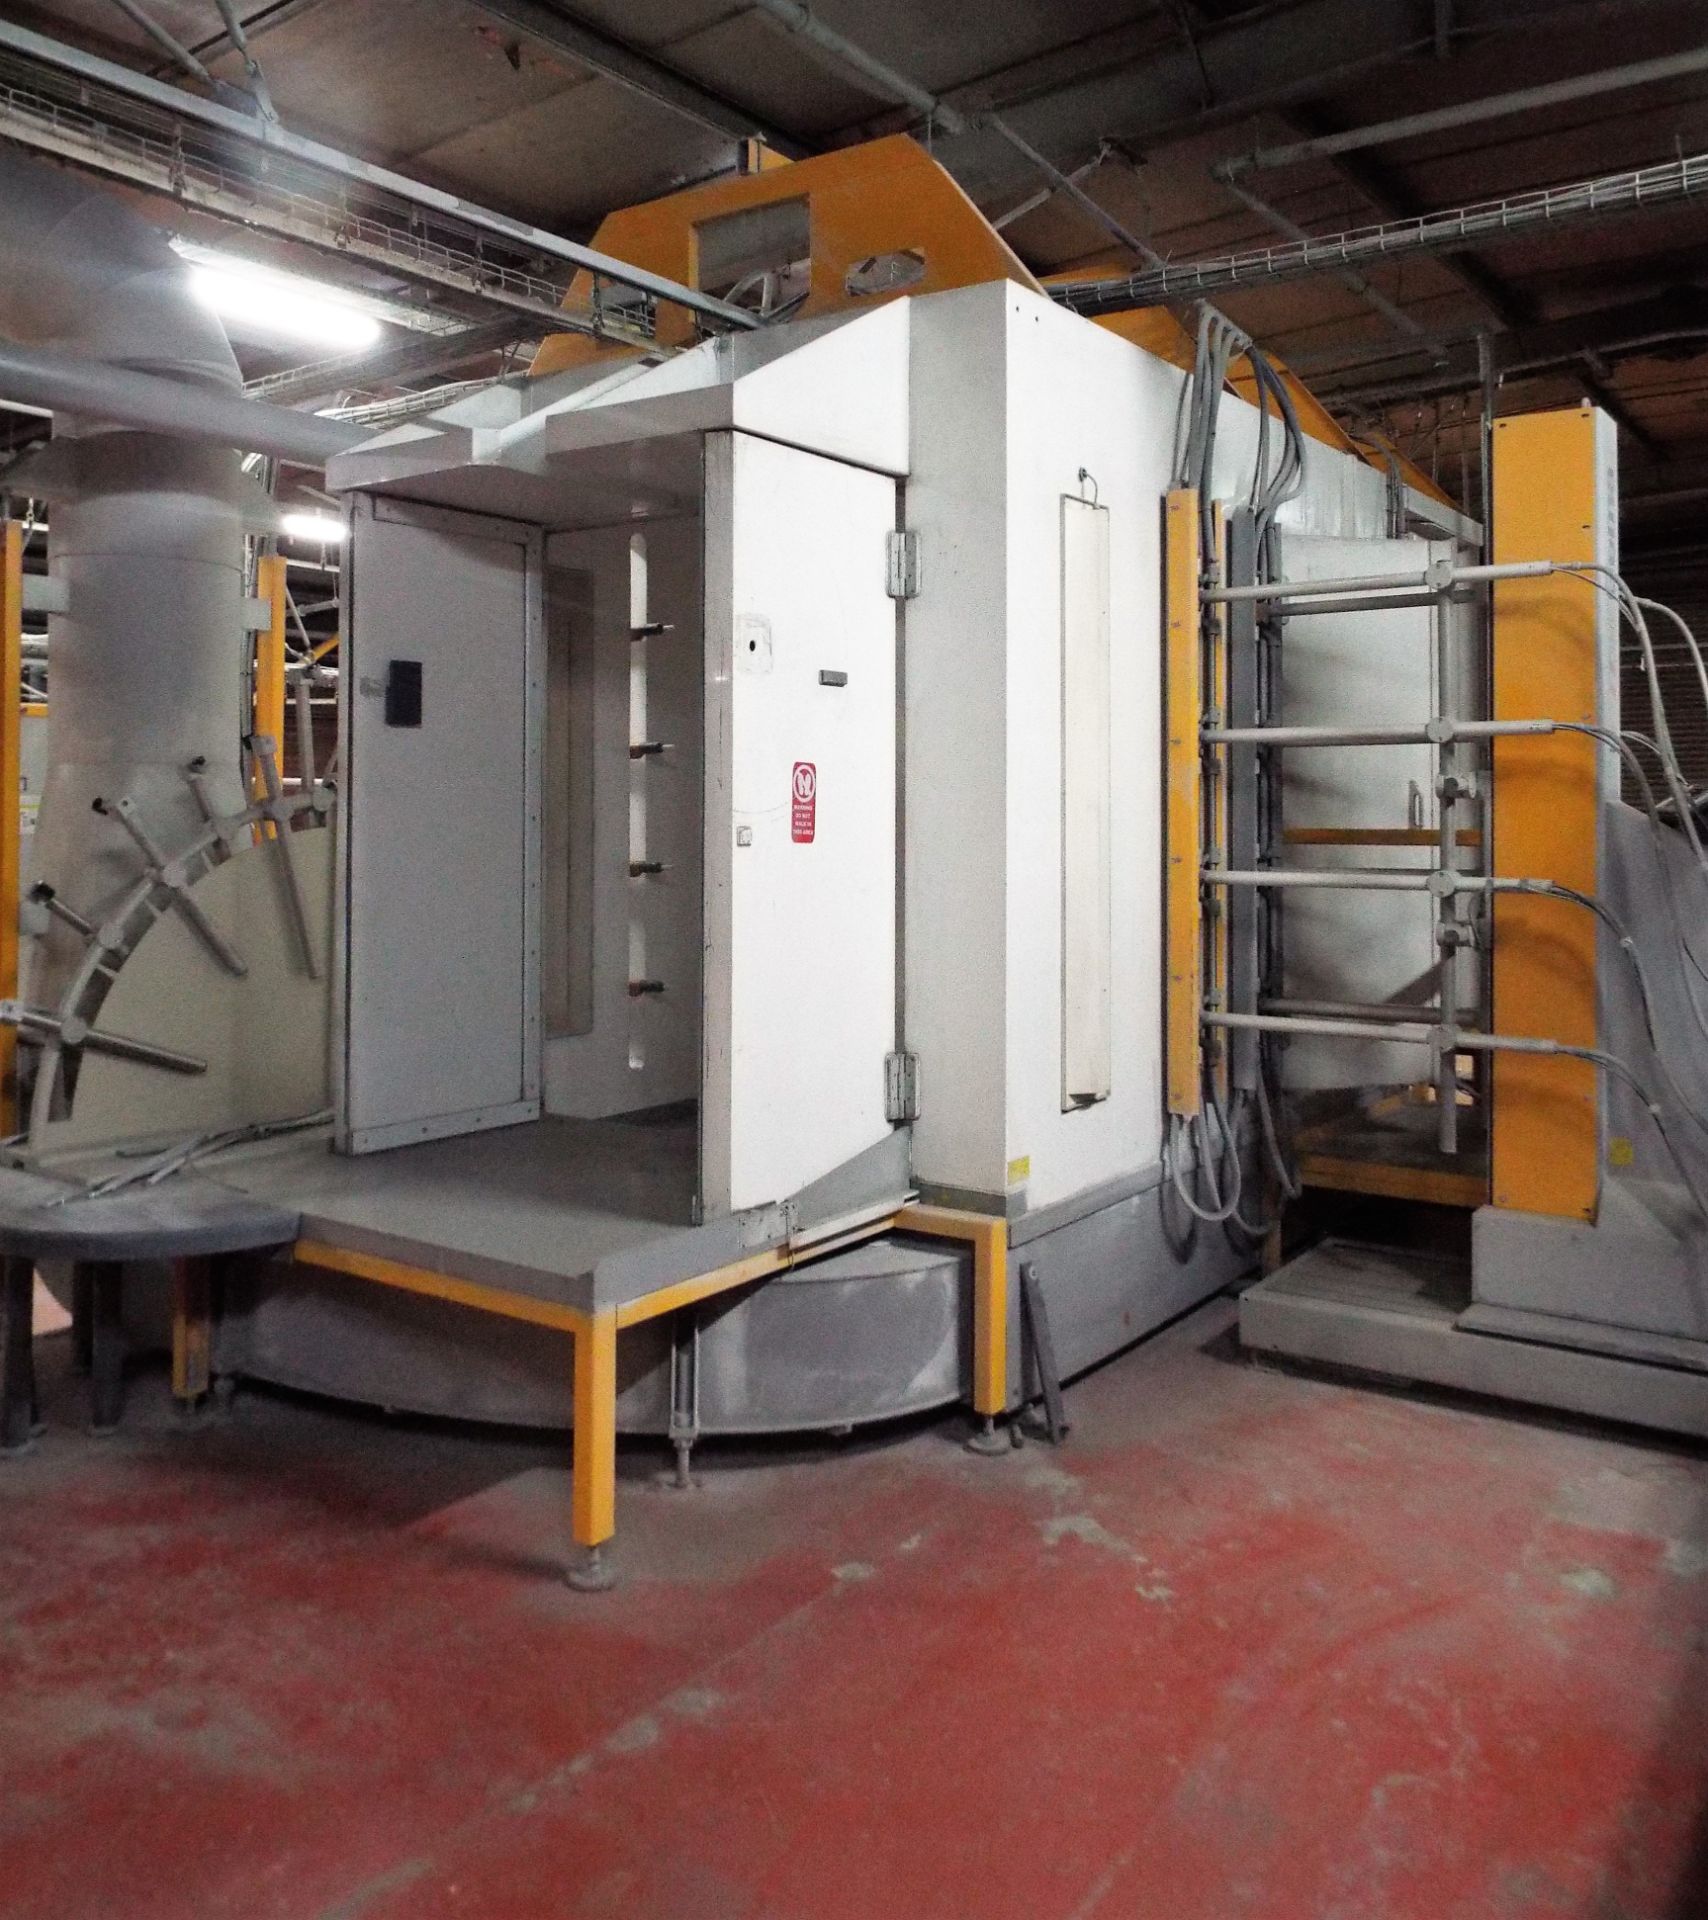 ITW Gema Powder Coating Application System cw Support Equipment - Image 41 of 47